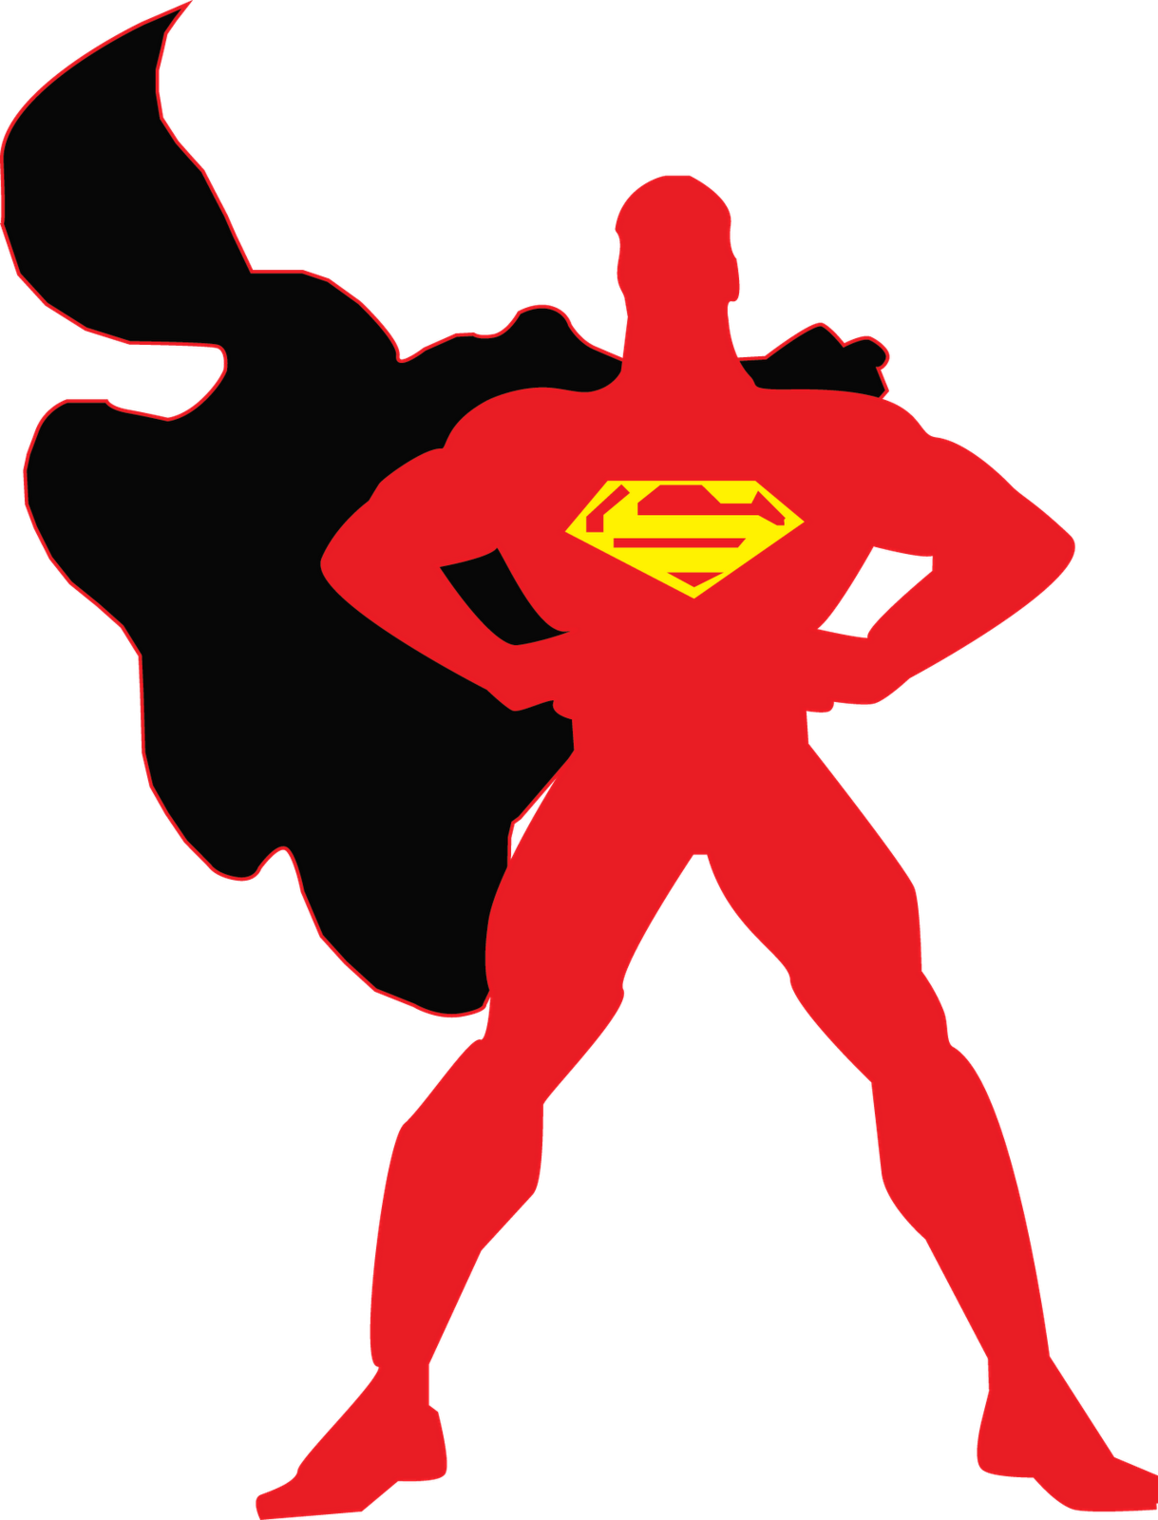 Superman Symbol Outline Clipart - Free to use Clip Art Resource